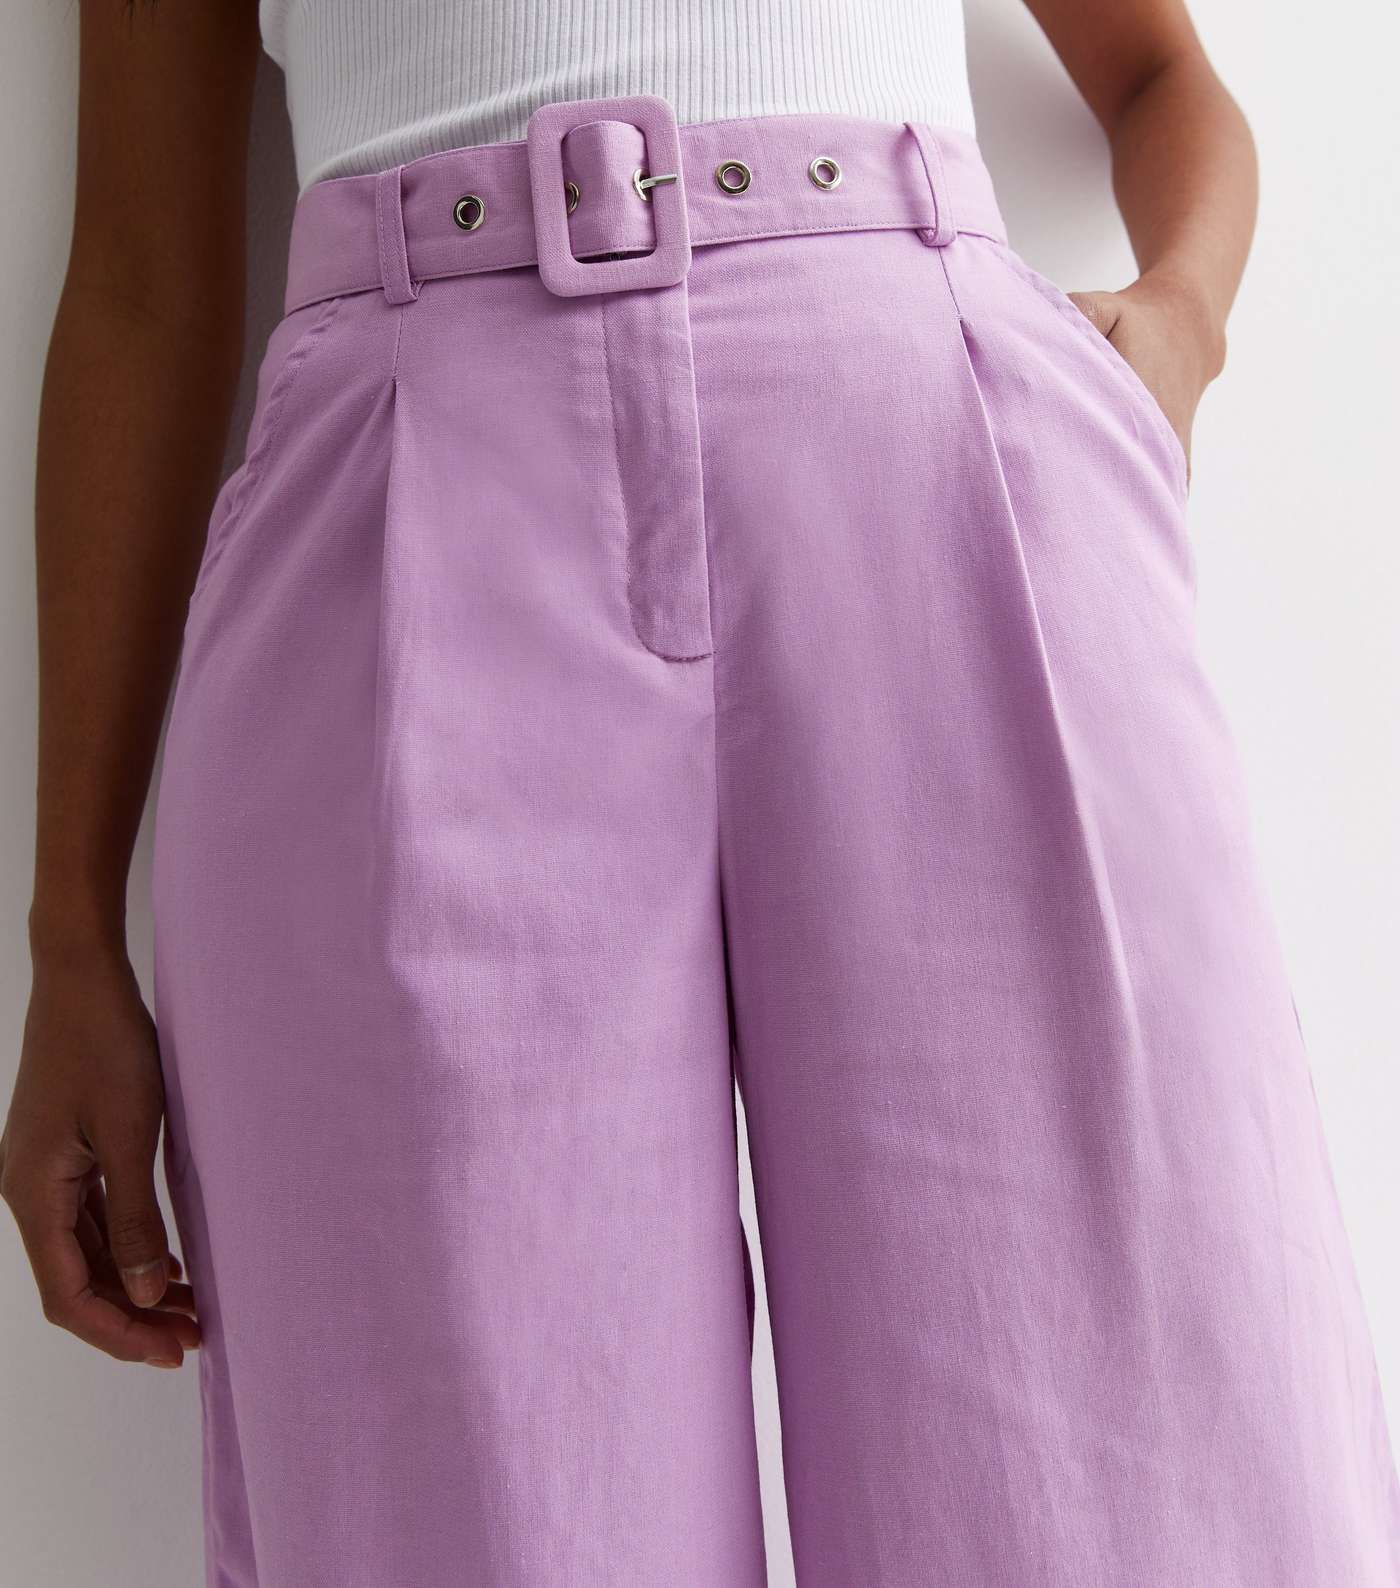 Gini London Lilac Linen-Look Belted Wide Leg Trousers Image 2